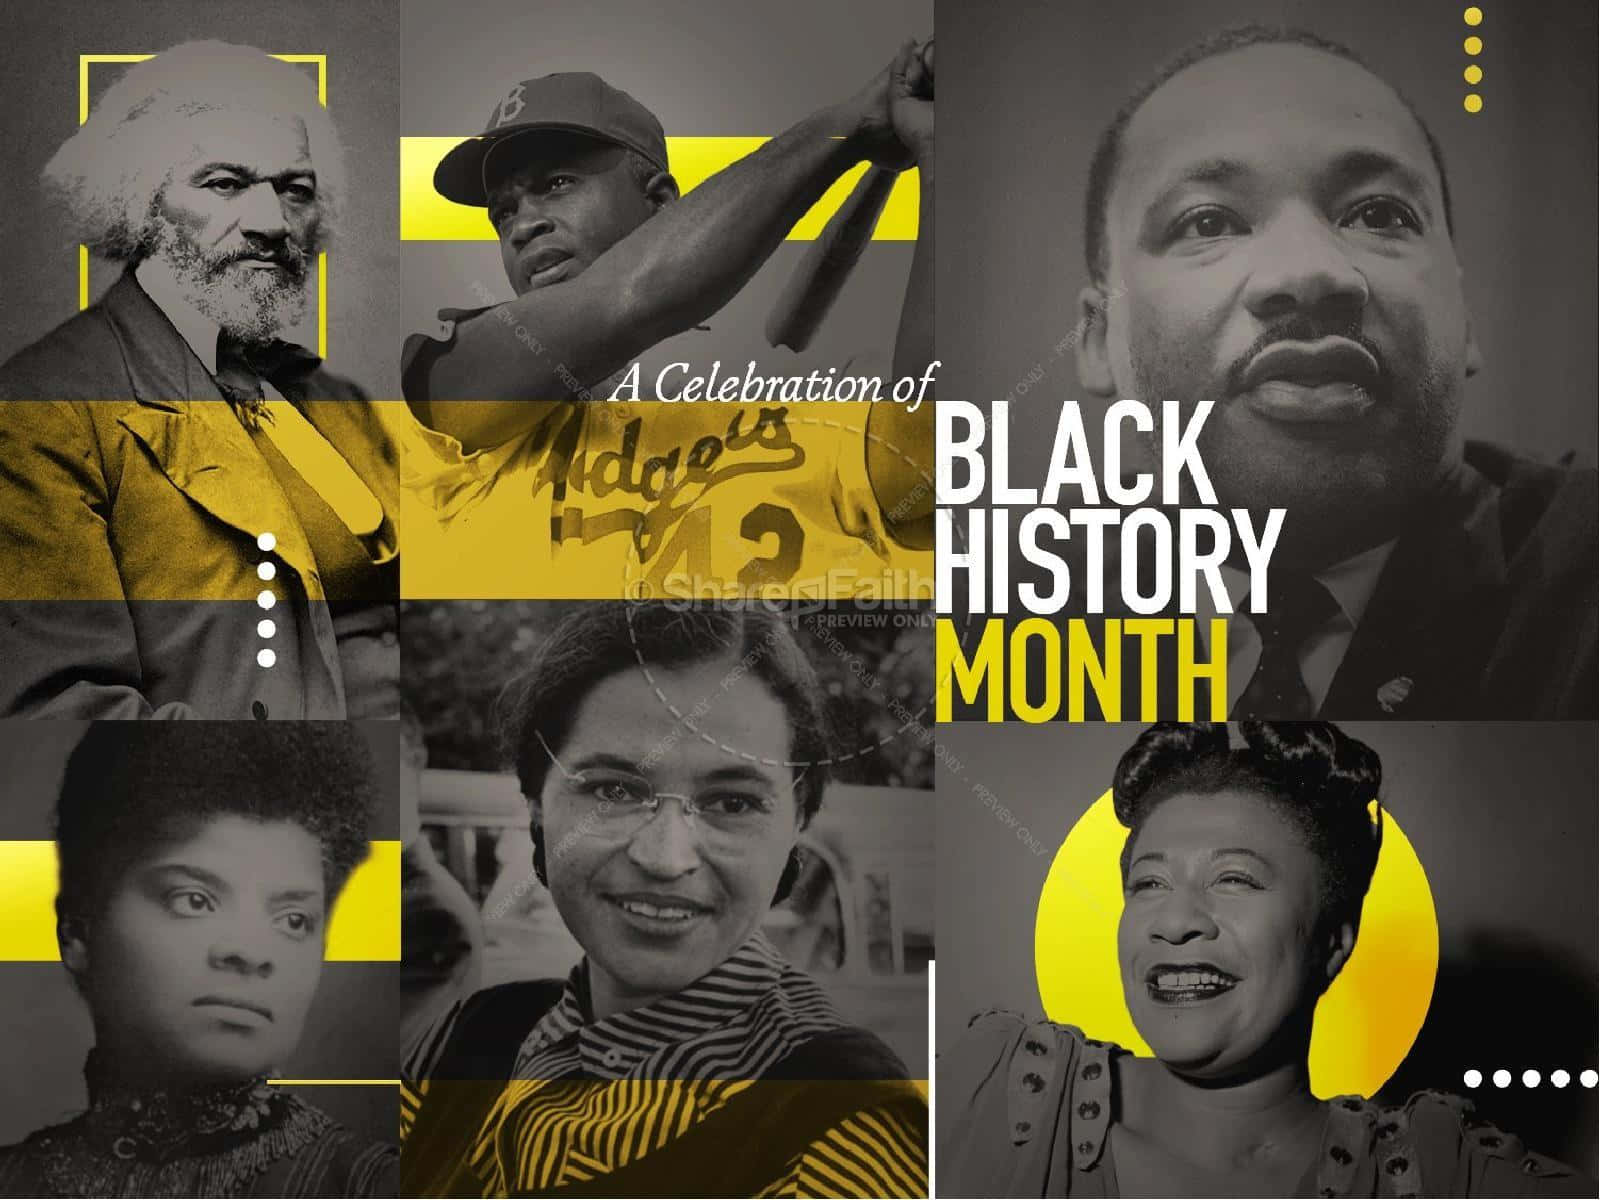 Black History Month Background Vector Images over 1700